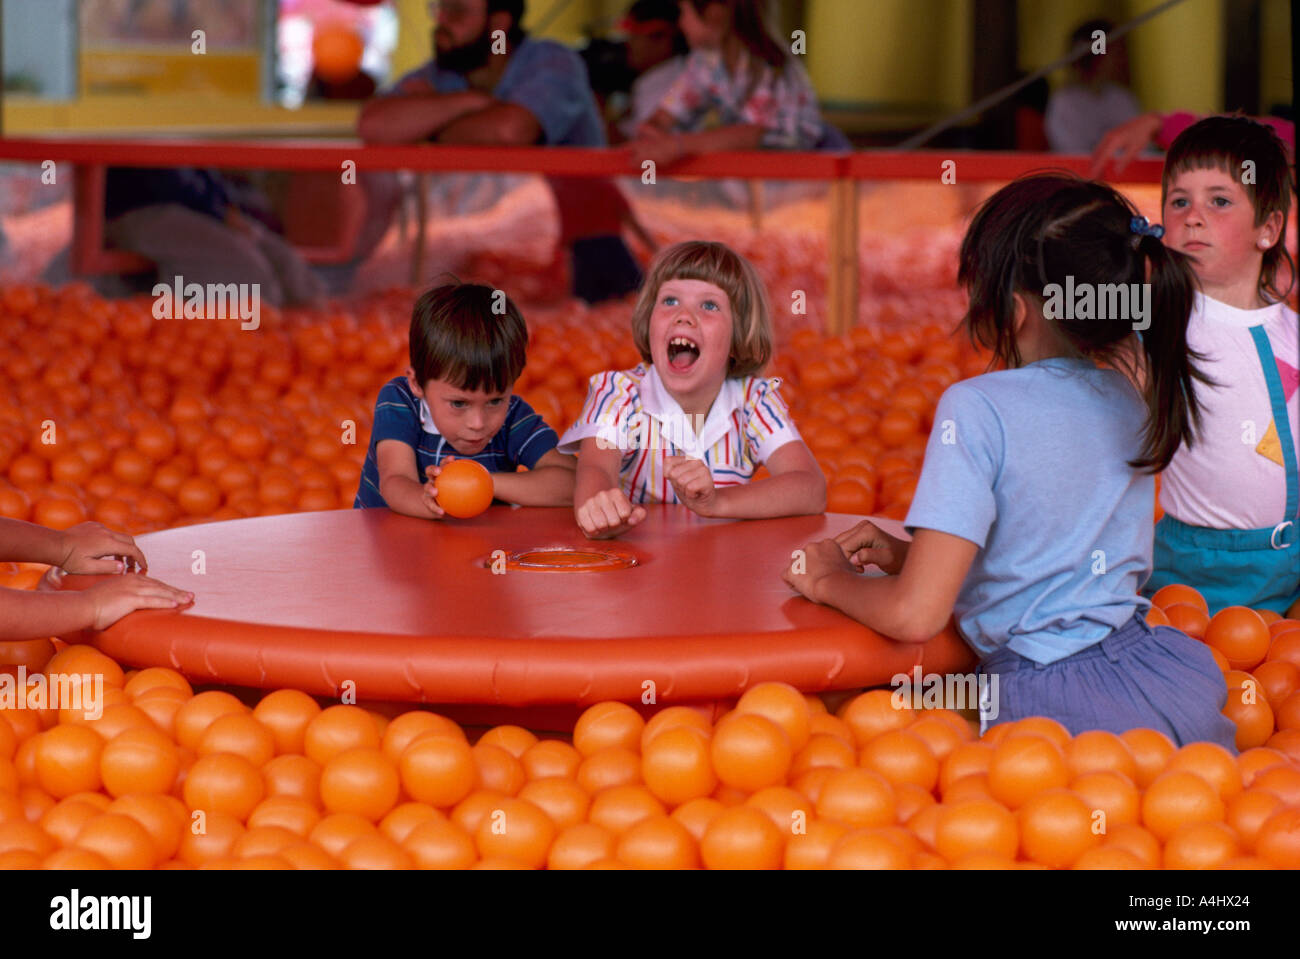 Young Children play in a Room filled with Balls in British Columbia Canada Stock Photo